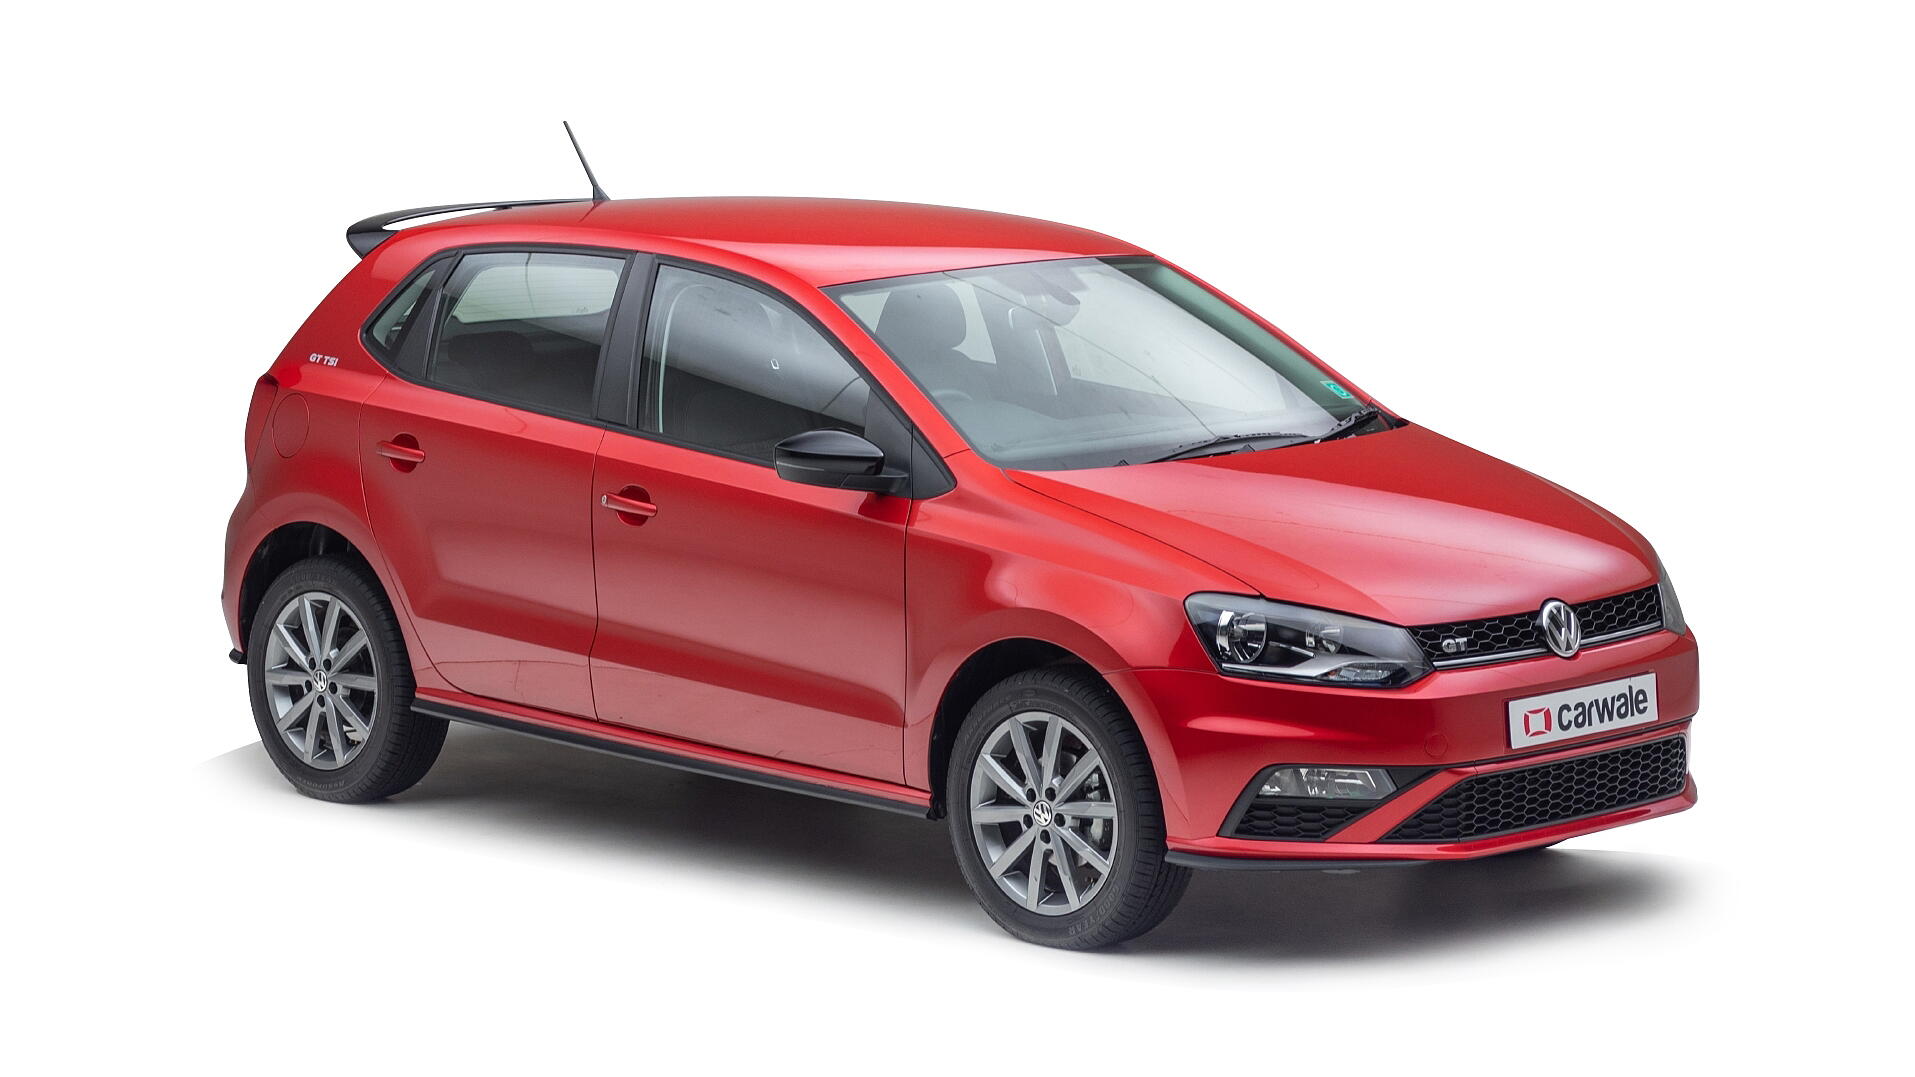 Volkswagen Polo GT (Polo Top Model) On Road Price, Specs, Review ...